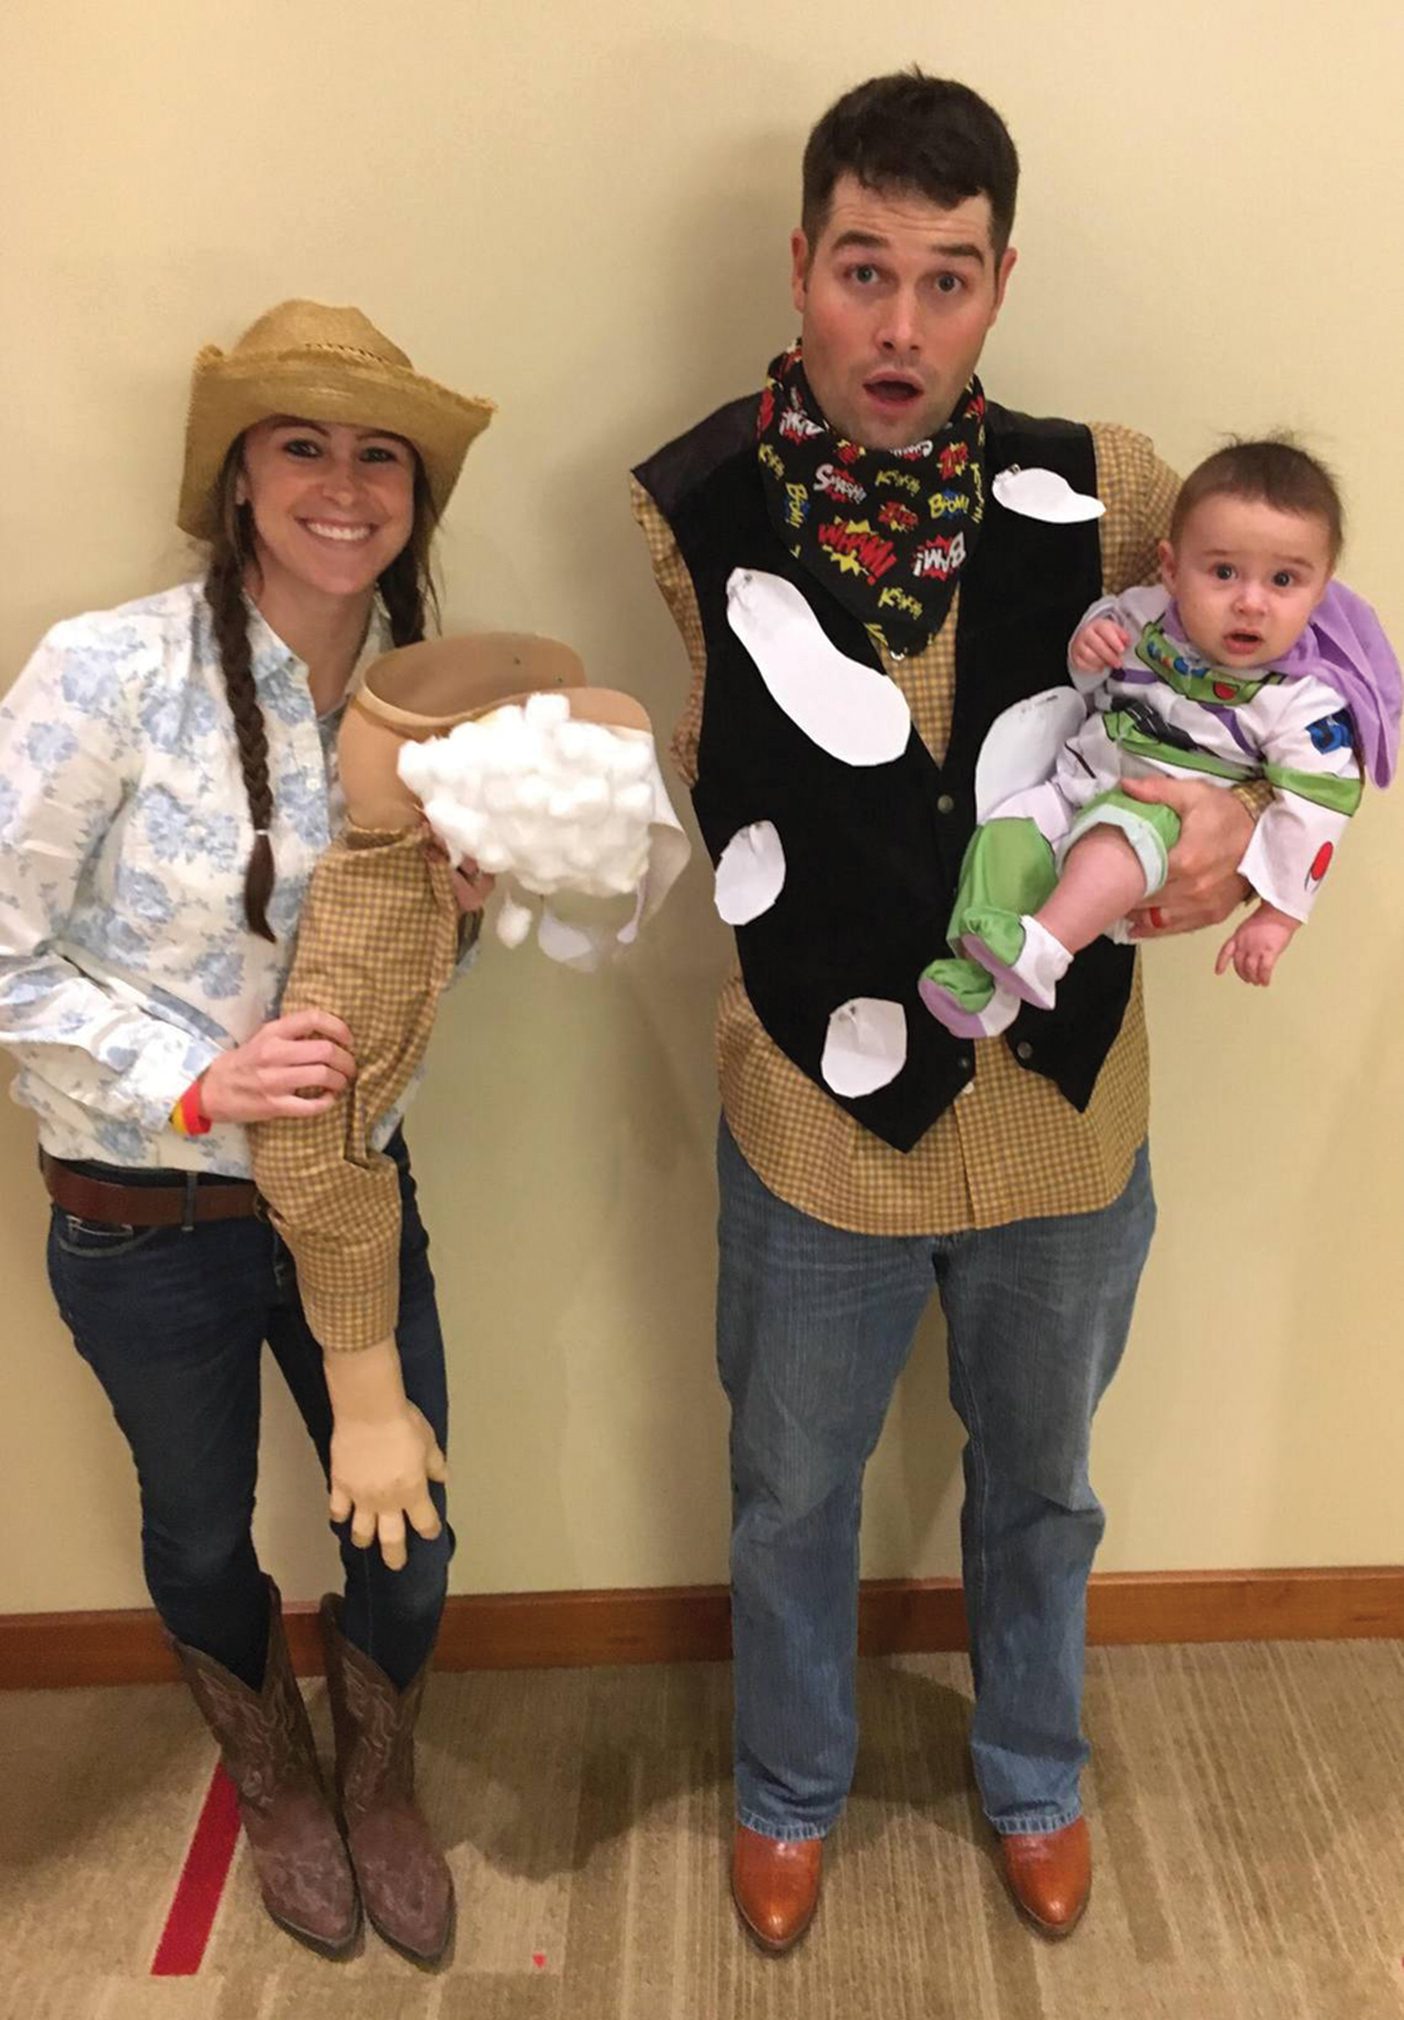 The family in Toy Story costumes: Carlie dressed as Jessie, holding Woody's unattached arm, Porter as an armless Woody, and their son as Buzz Lightyear,